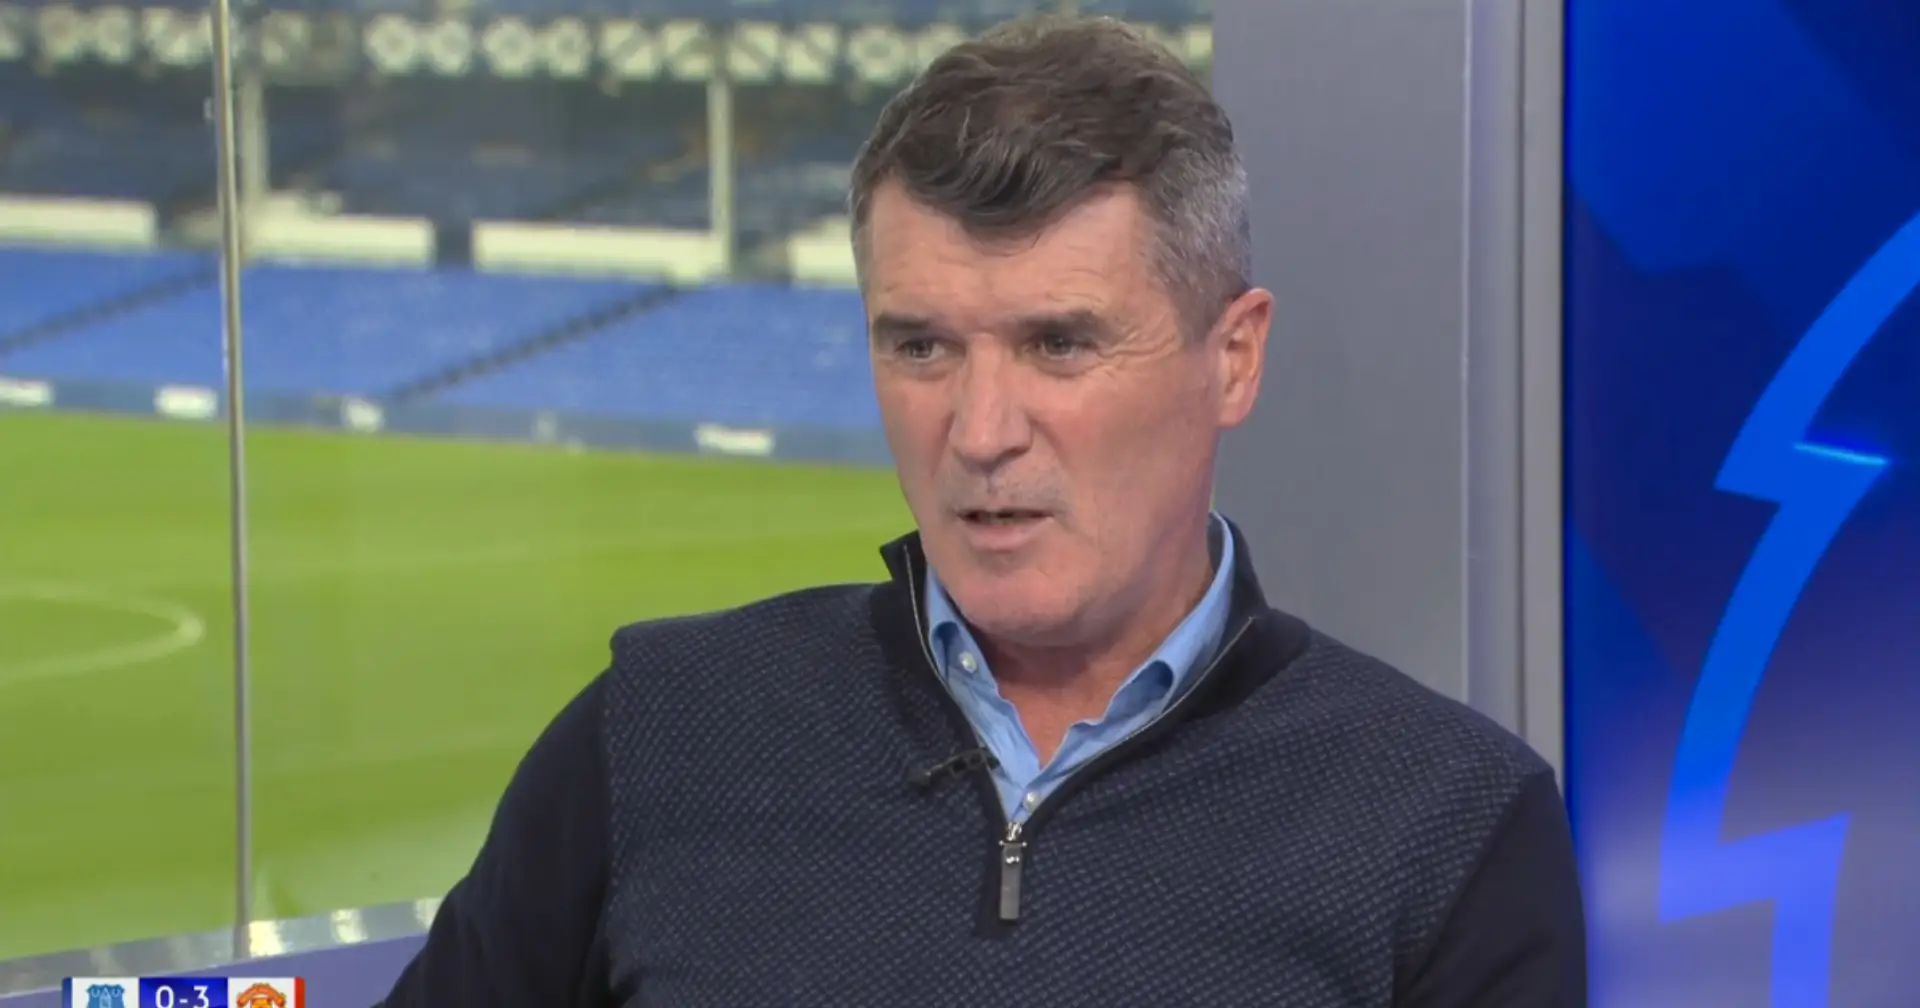 'Absolute bloody rubbish': Roy Keane finds reason to slam Ten Hag and Man United after Everton win